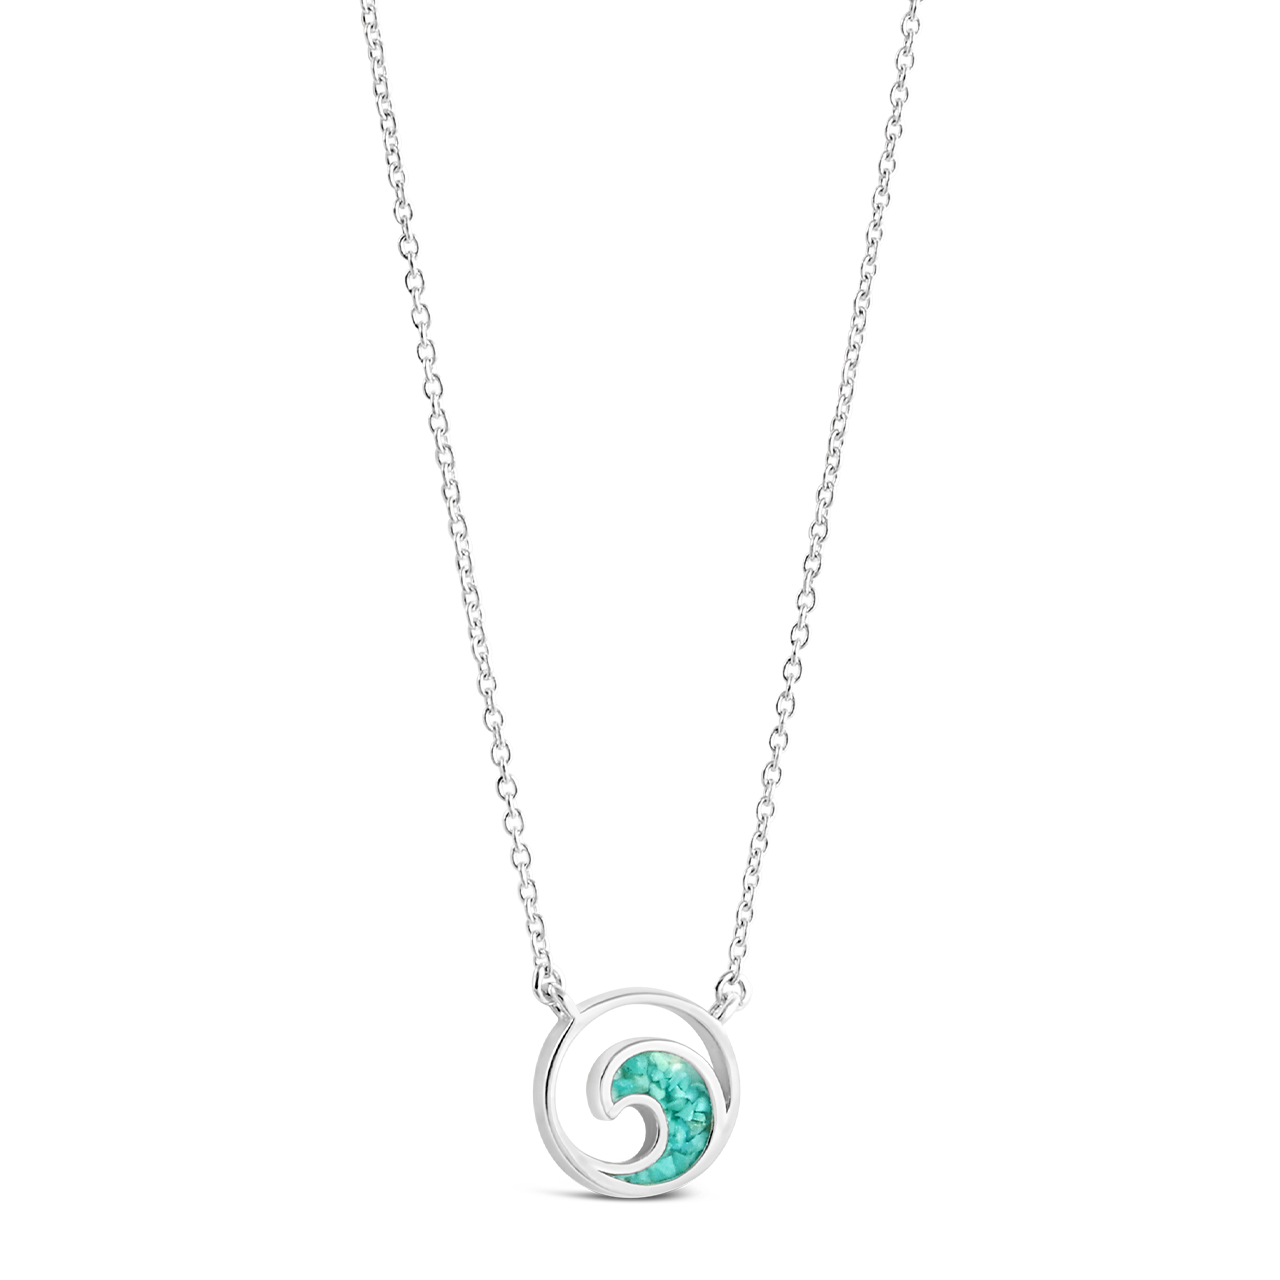 Sterling silver cable chain necklace with wave shaped pendant and one sand or earth element. The perfect Valentine's gift.